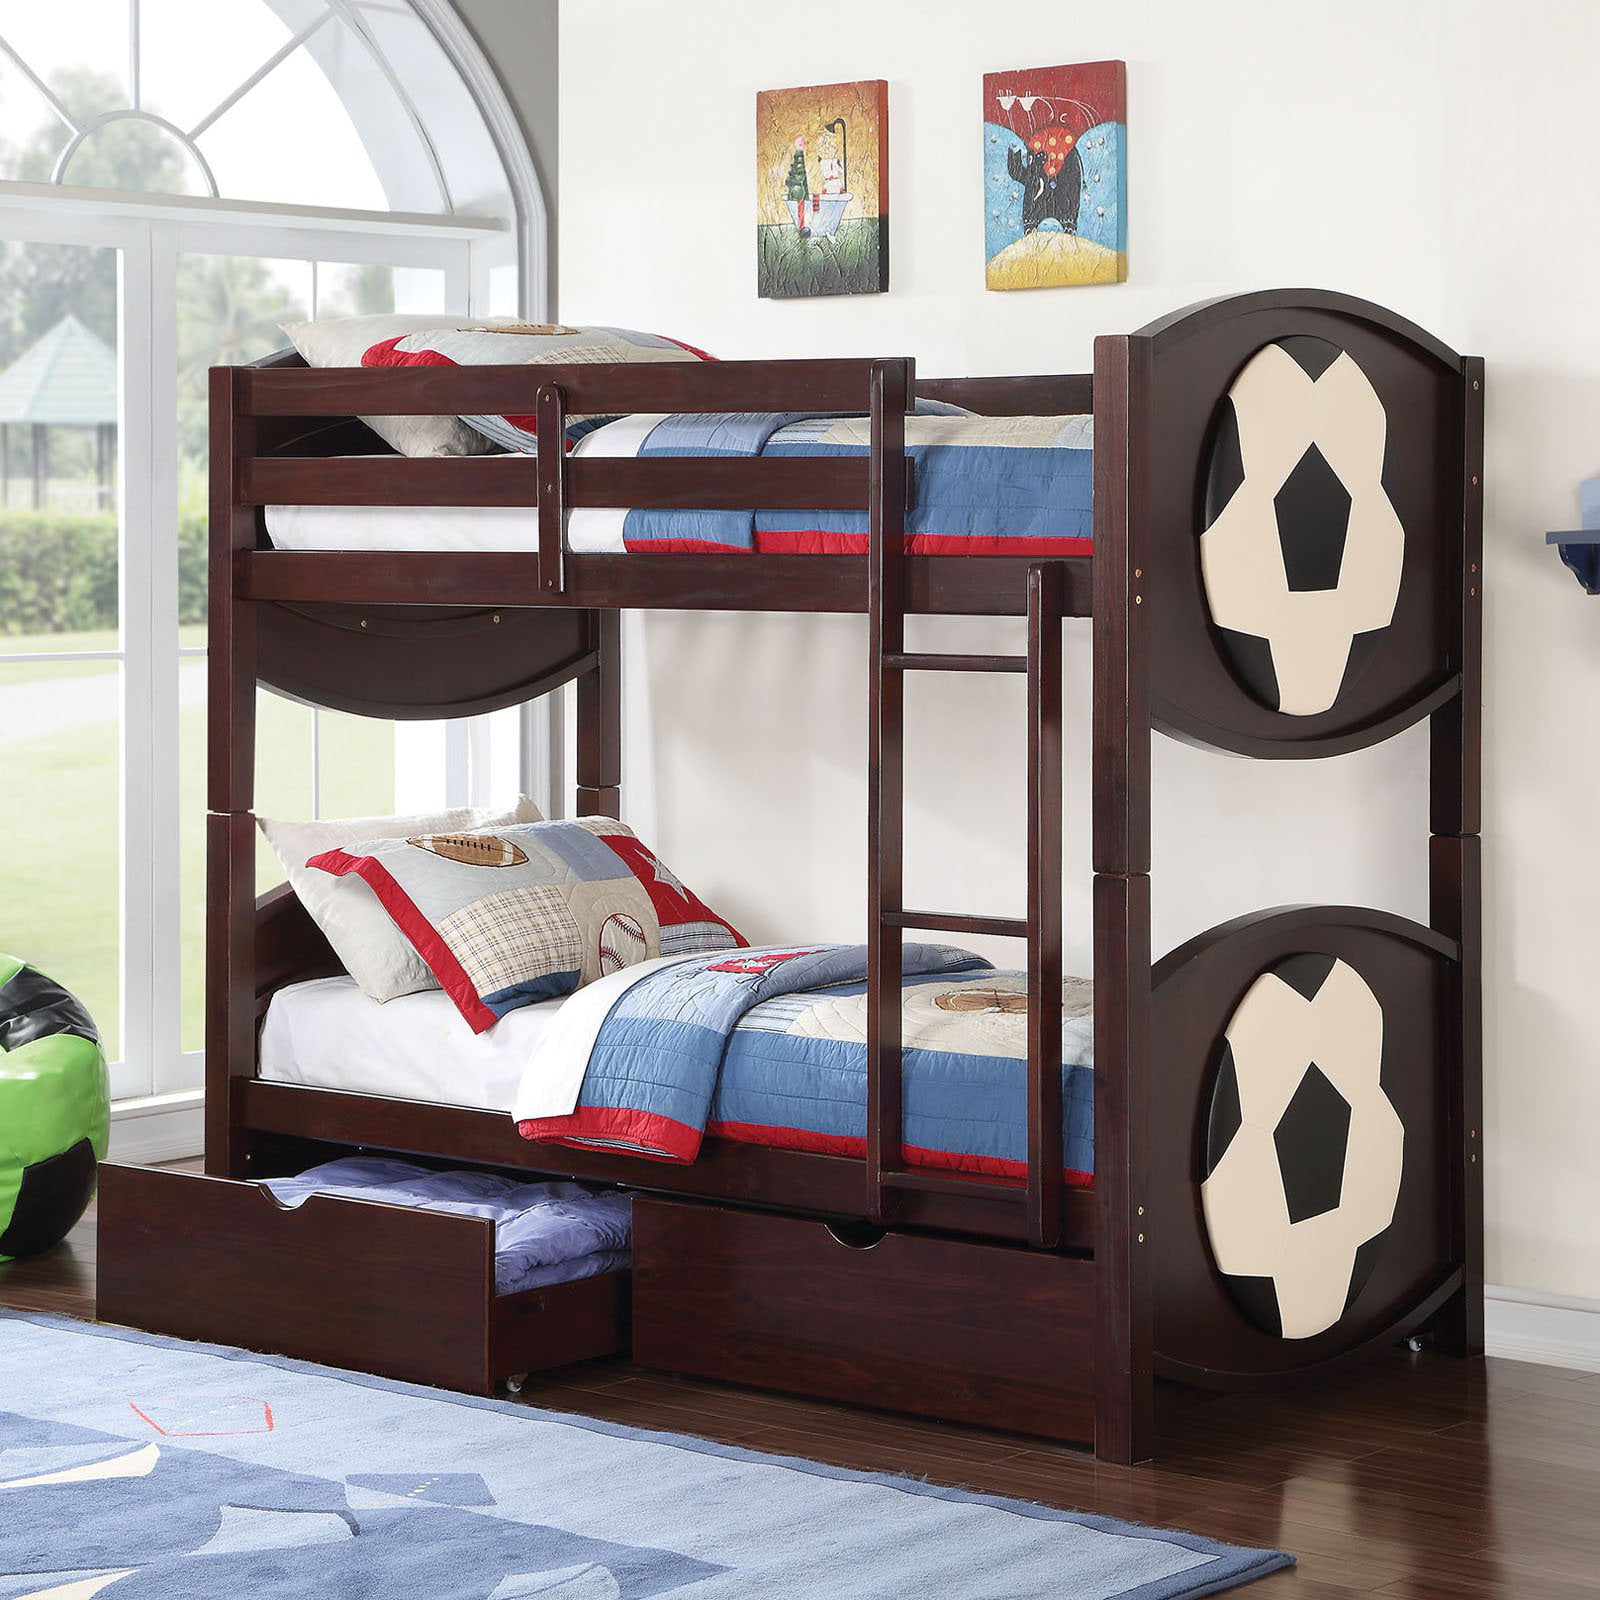 Acme Furniture All Star Soccer Ball, Star Furniture Bunk Beds